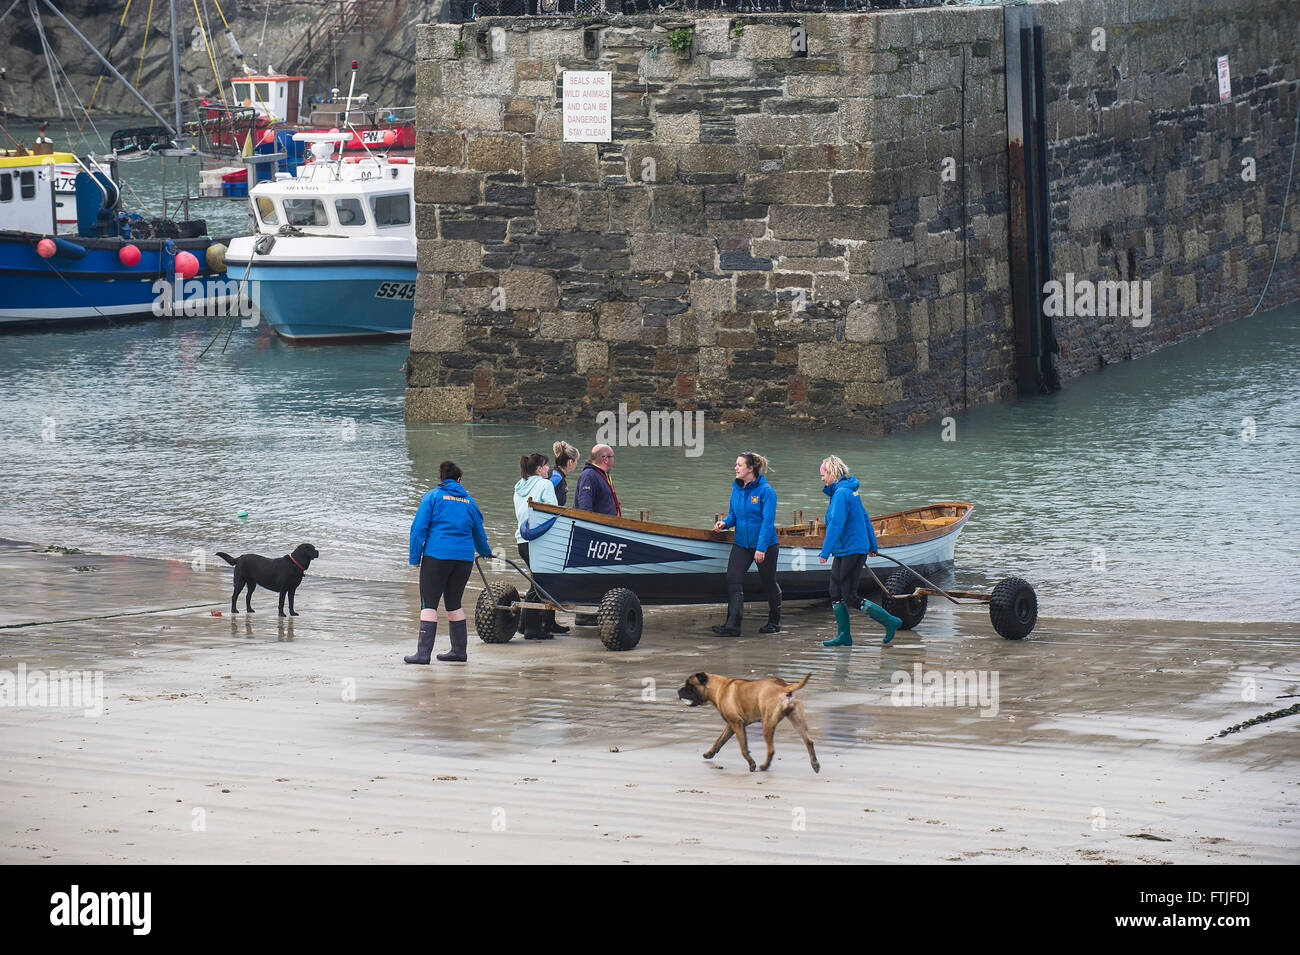 Hope, a traditional Cornish racing gig is prepared for launching in Newquay Harbour by its all female crew. Stock Photo